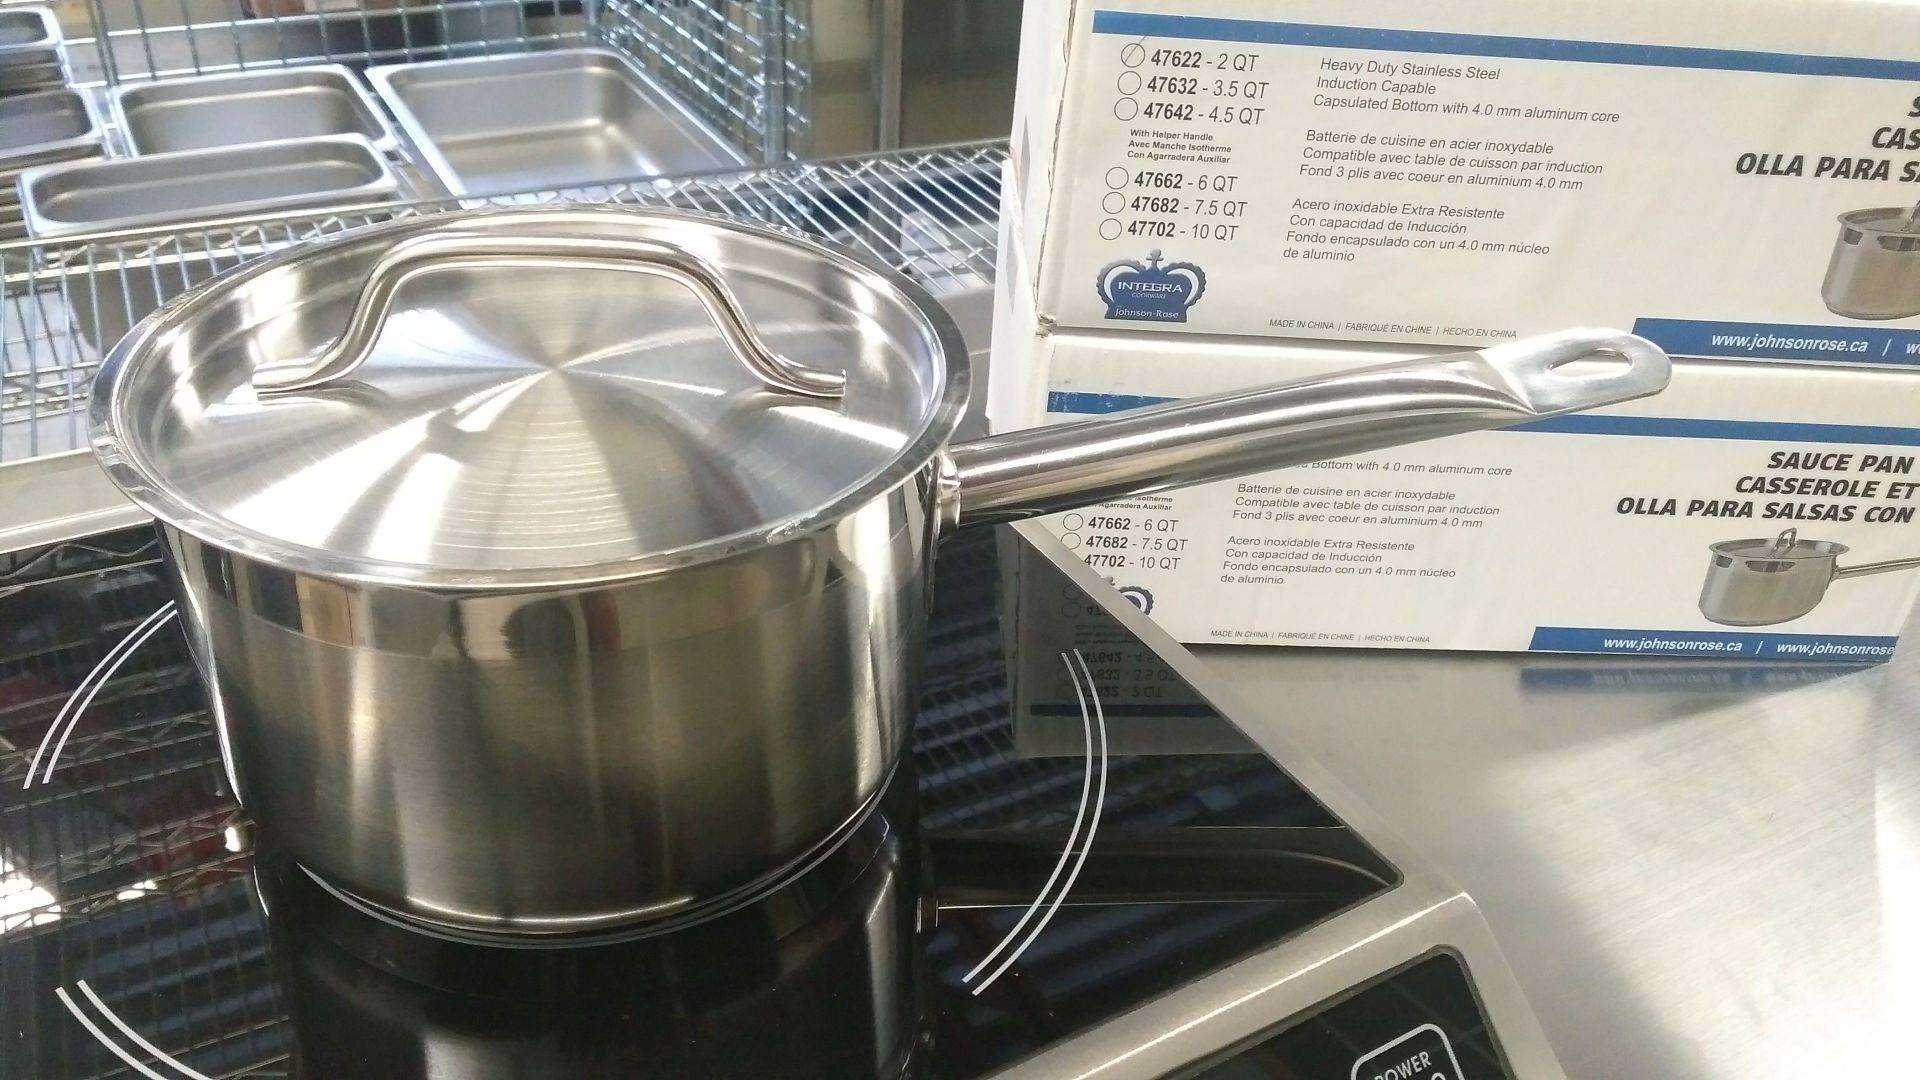 2qt Heavy Duty Stainless Sauce Pan Induction Capable, JR 47622